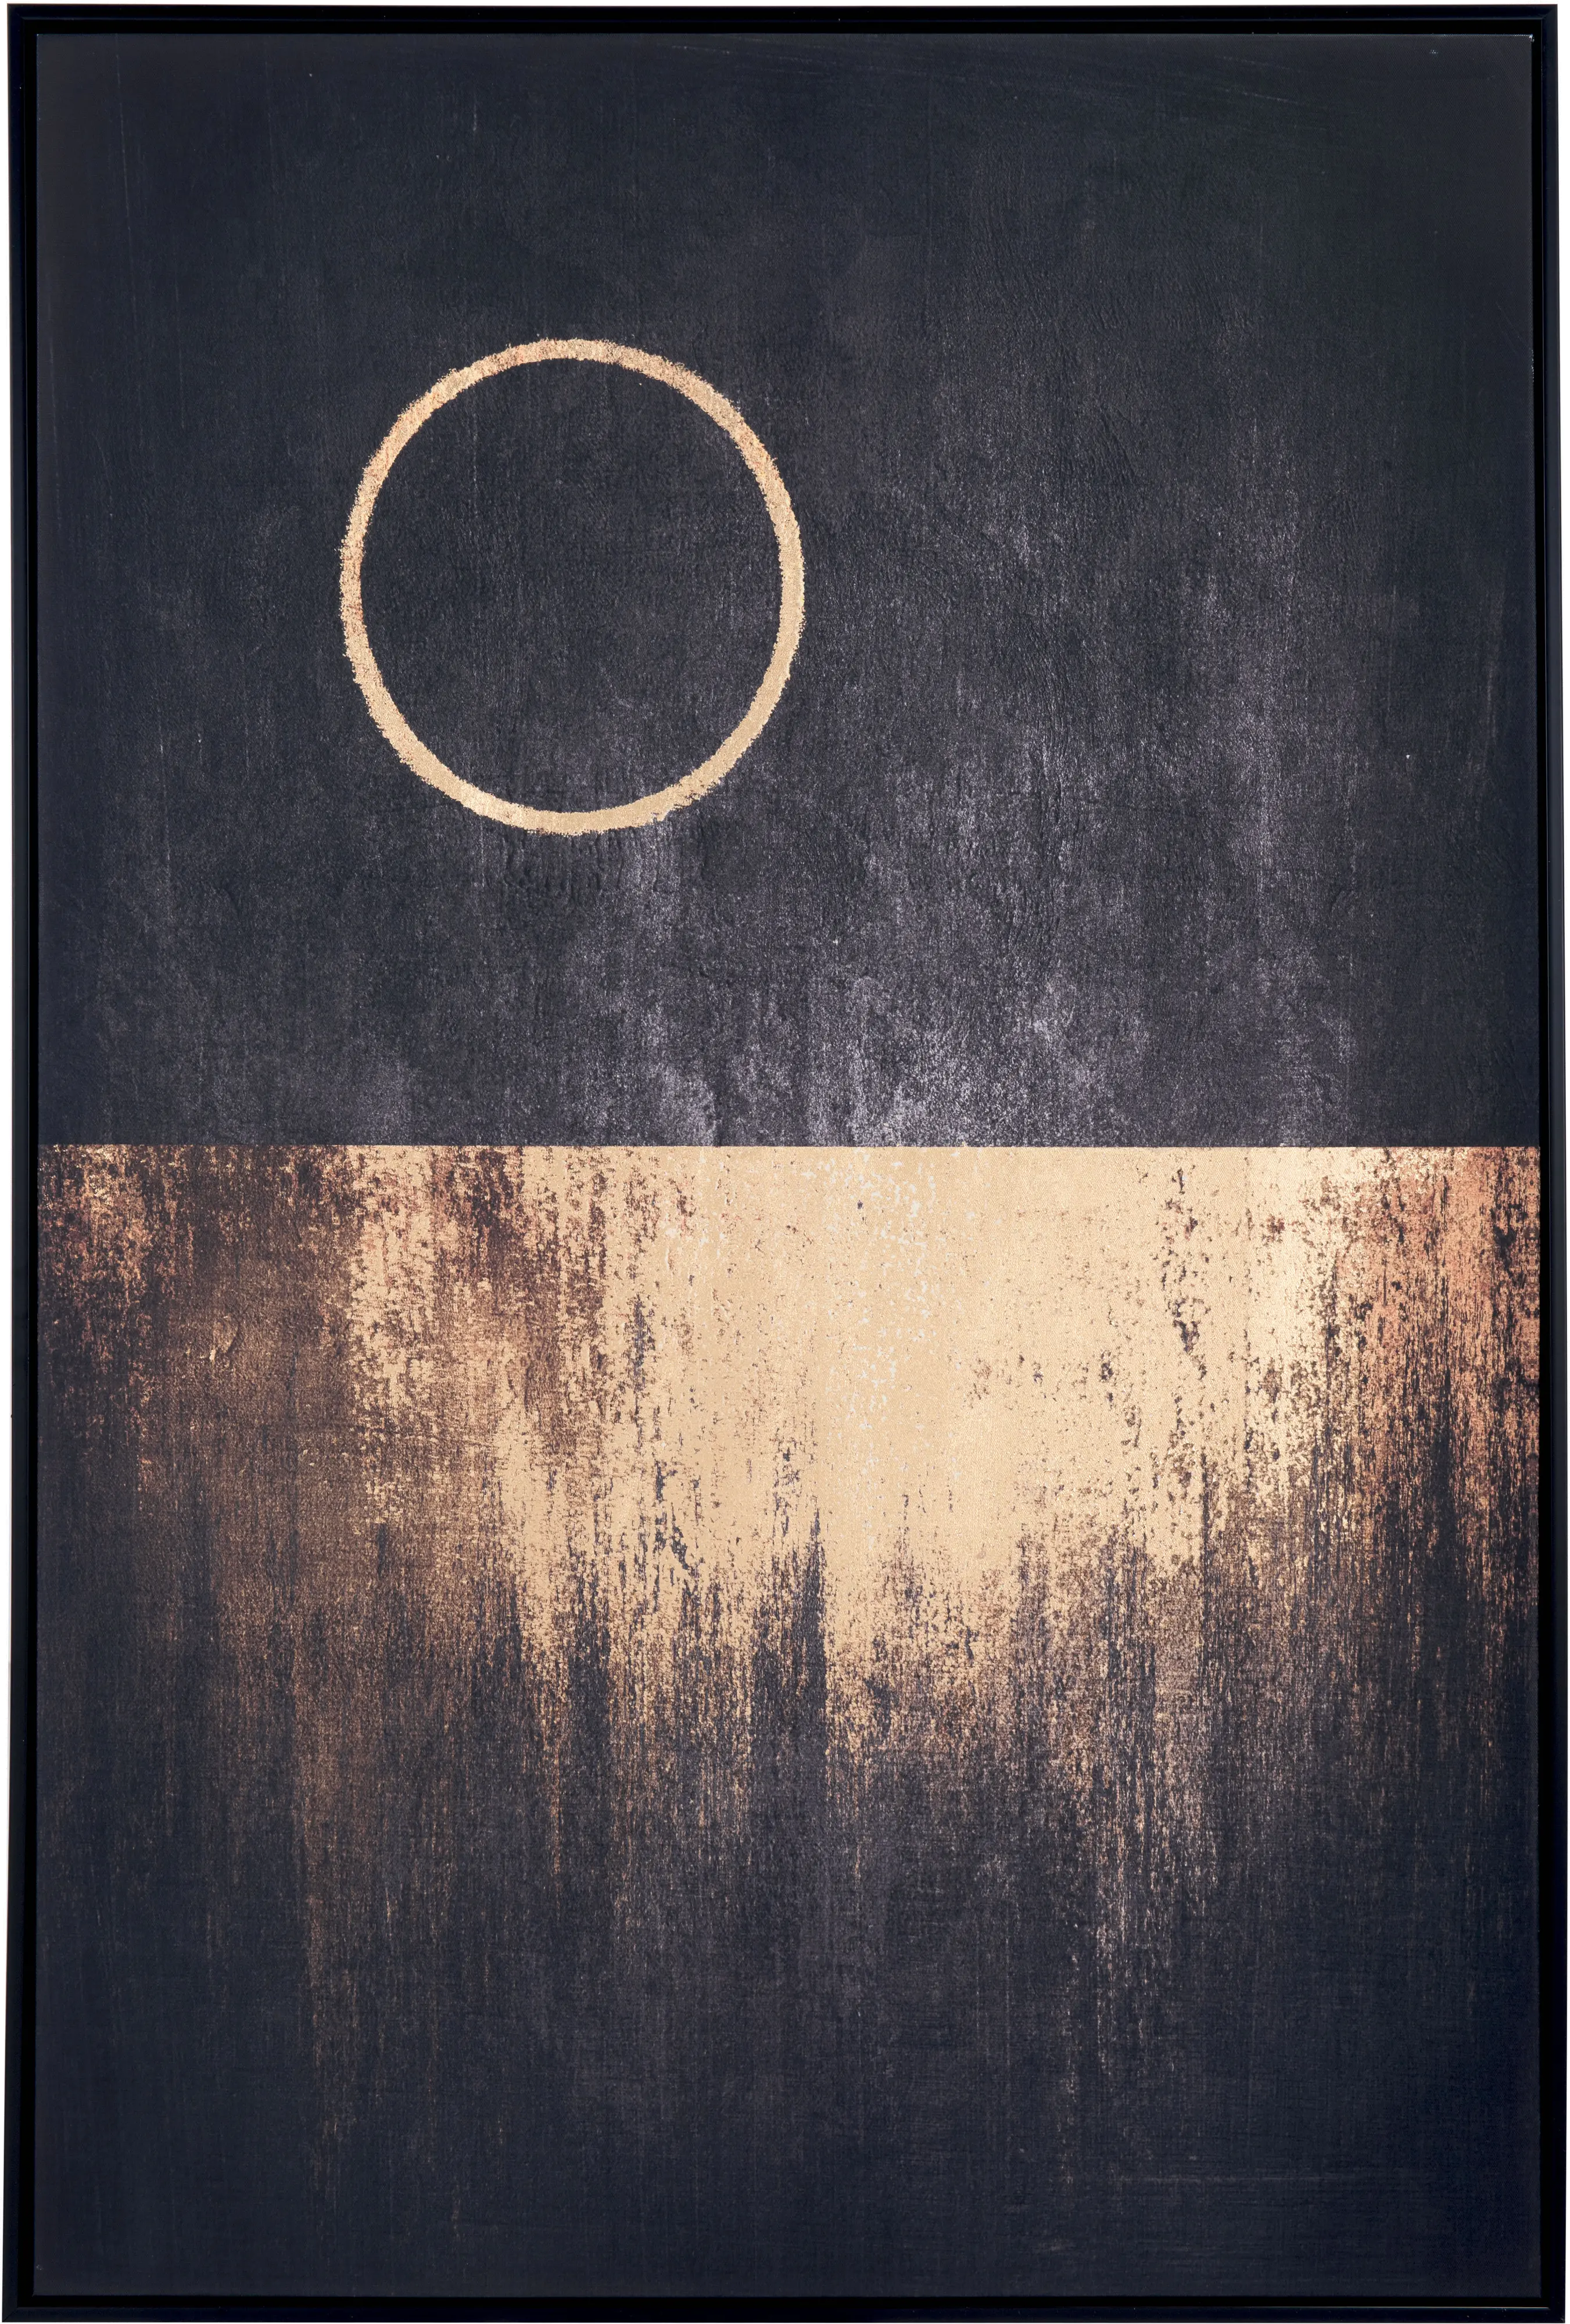 Black and Gold Full Moon Rises Canvas Wall Art